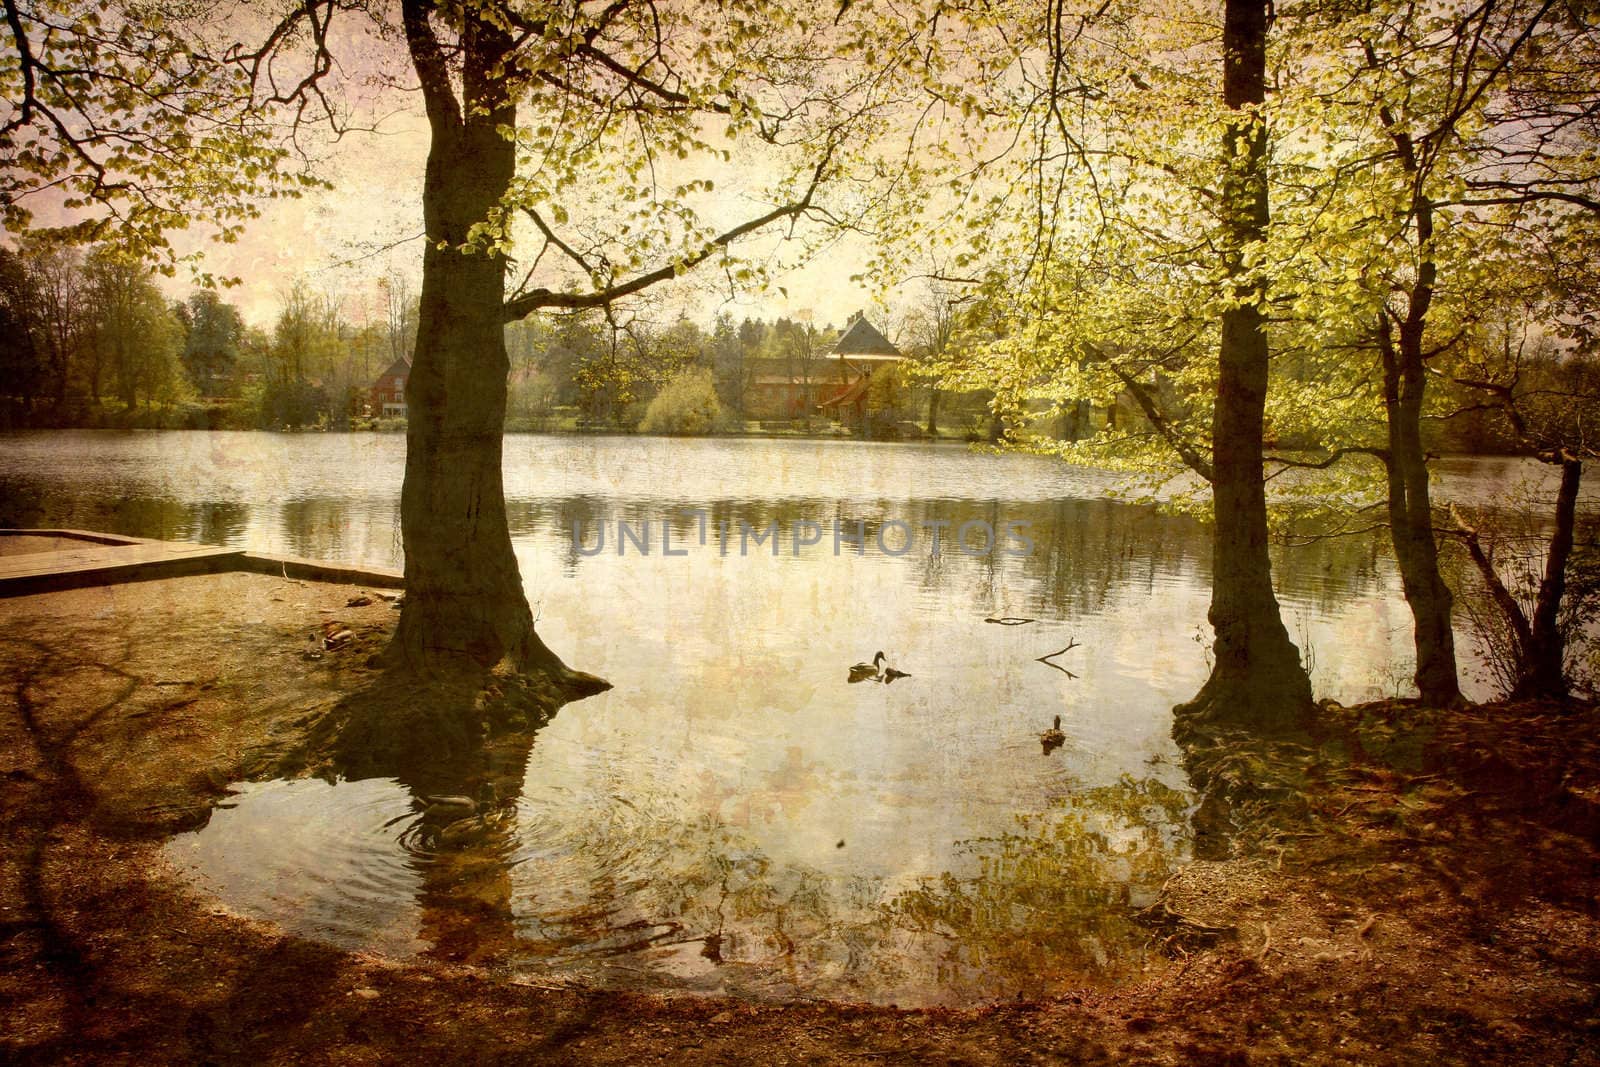 Artistic work of my own in retro style - Postcard from Denmark. - Morning by the lake.